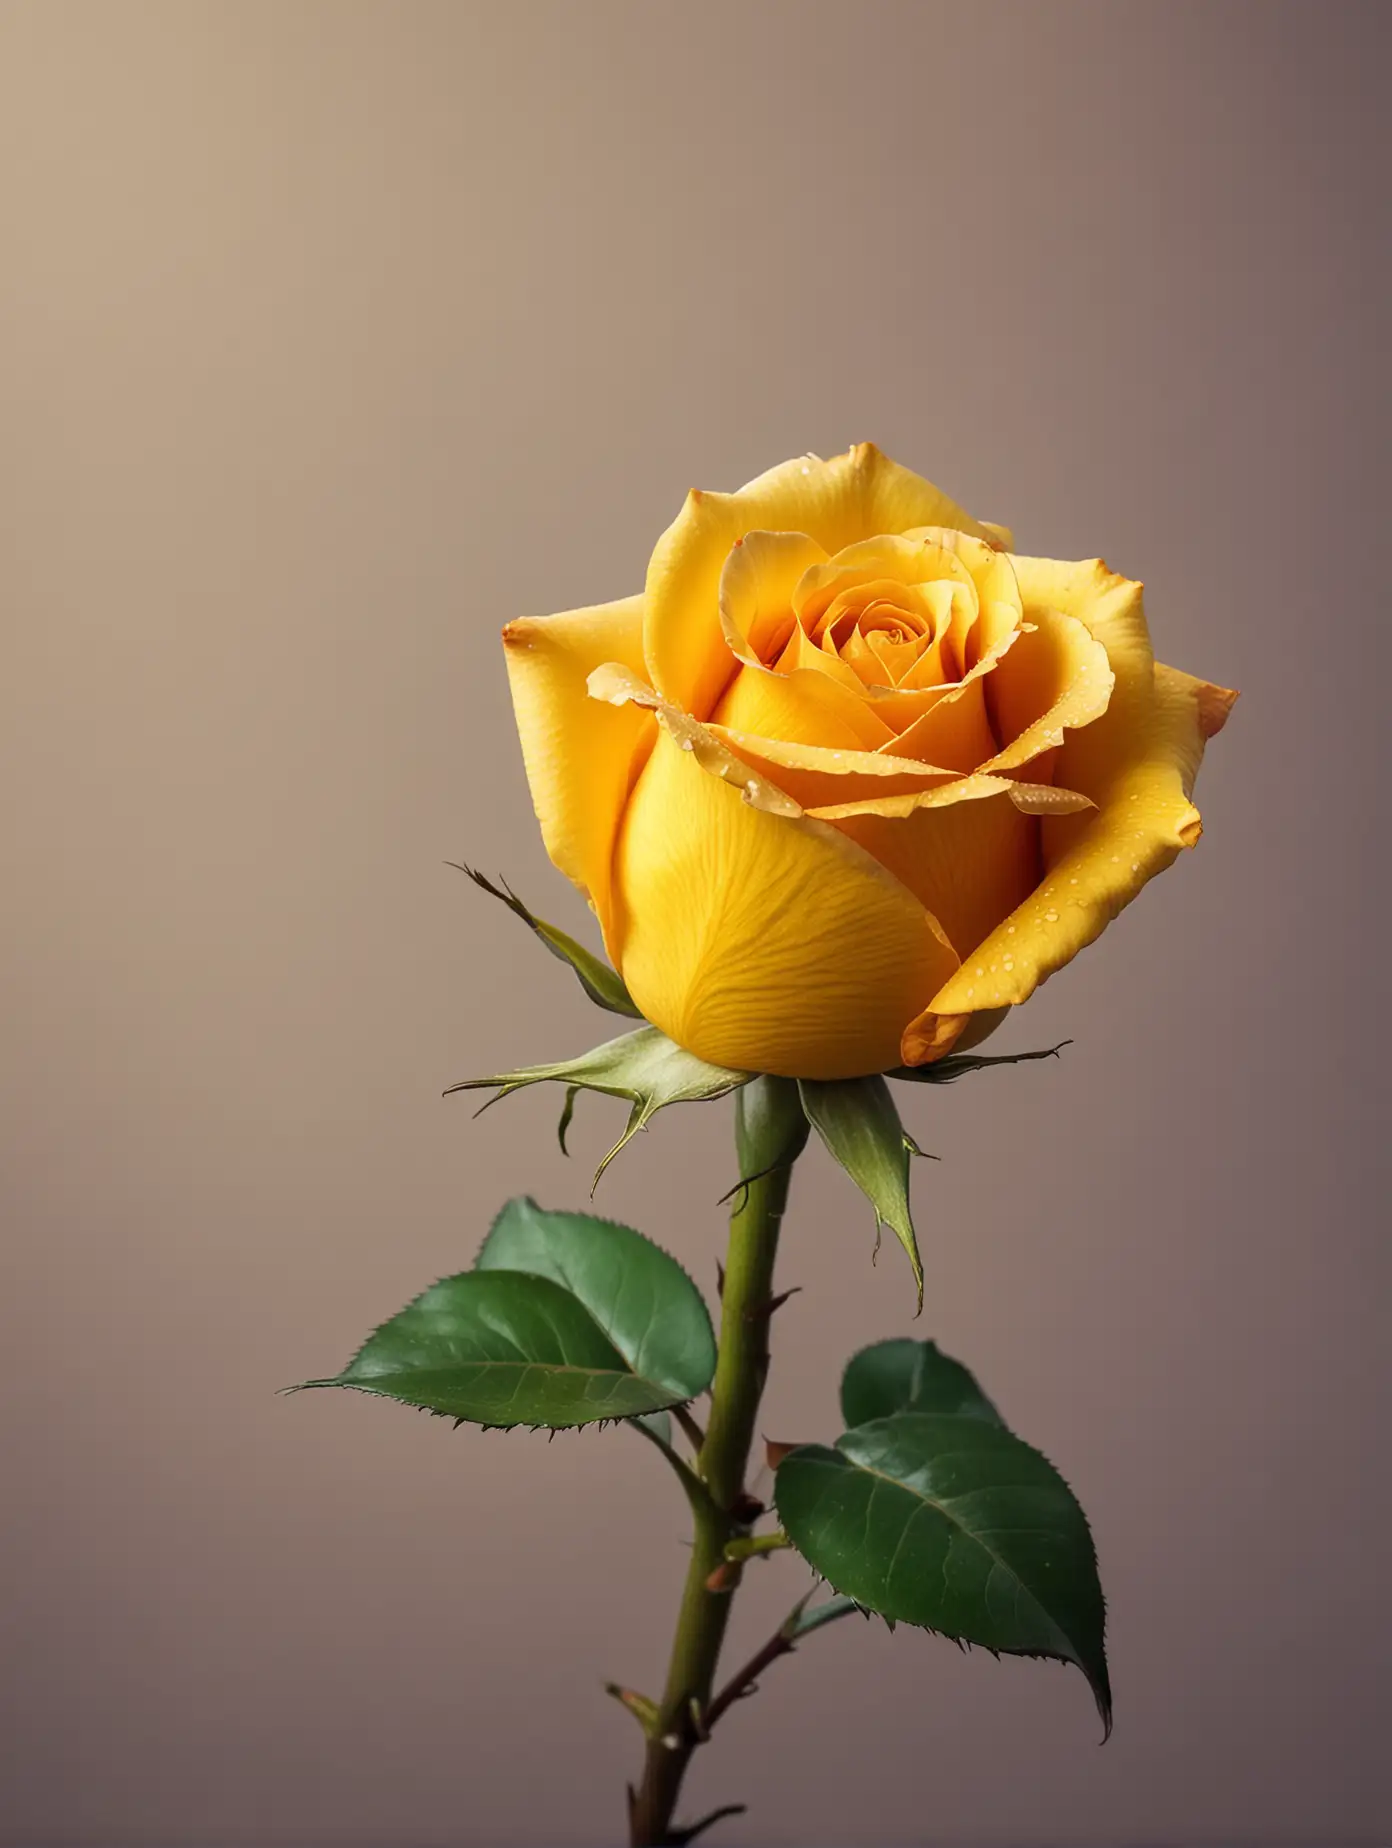 Vibrant Yellow Rose Blossoming in Stunning 4K Resolution